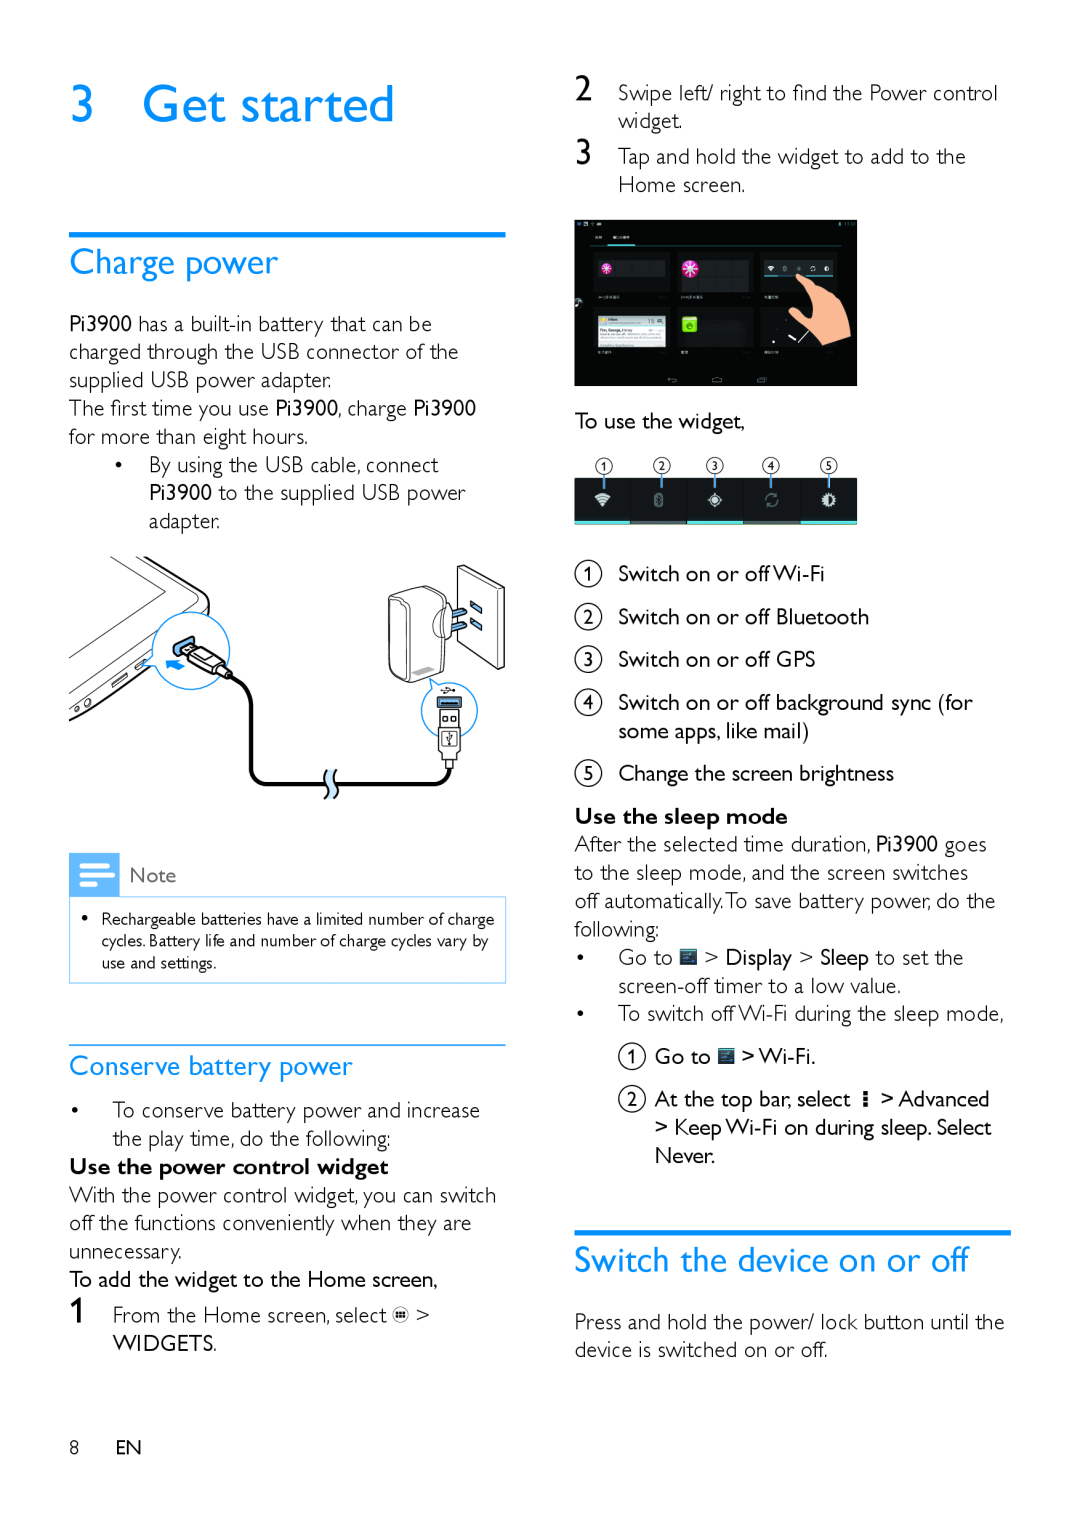 Philips PI3900 manual Get started, Charge power, Switch the device on or off, Conserve battery power, Use the sleep mode 